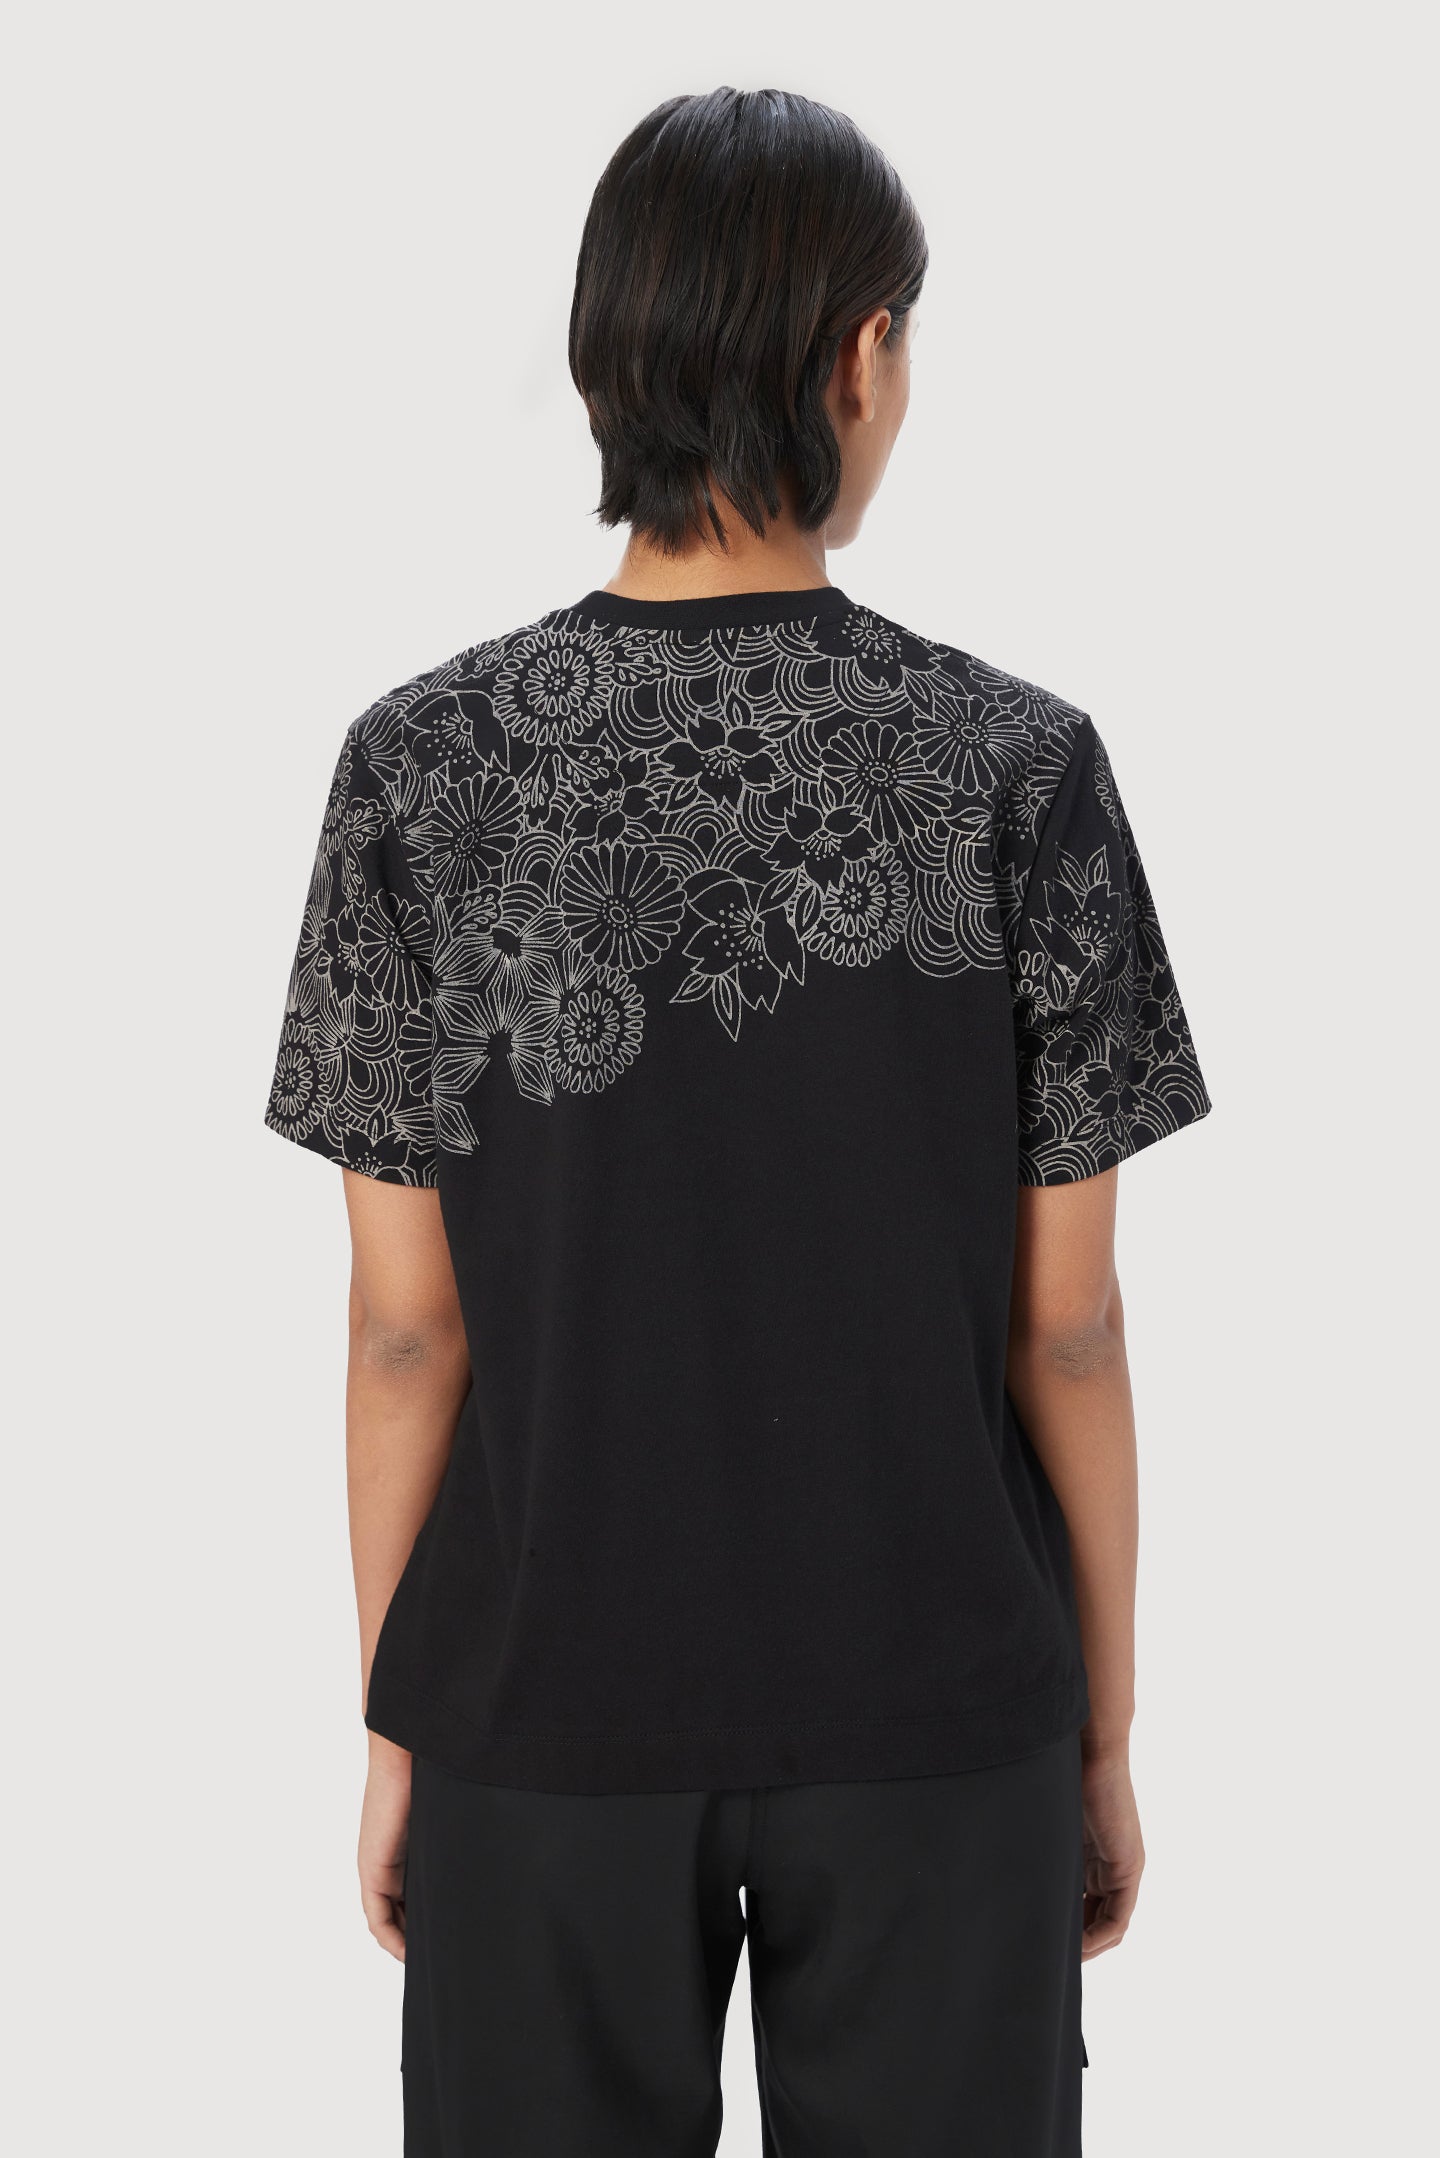 Regular Fit T-Shirt Featuring Floral Print Placement